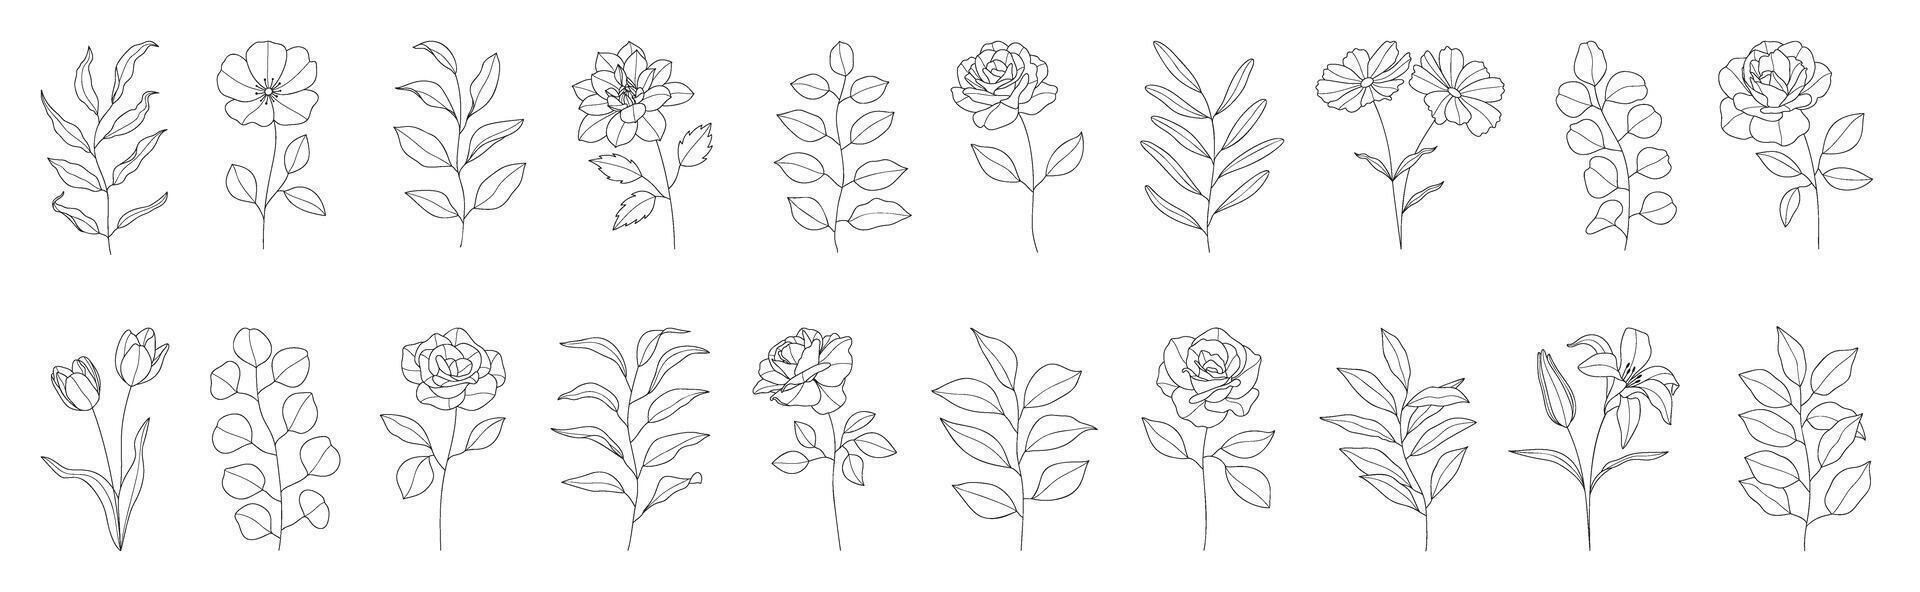 Set of flower hand drawn element vector. Collection of foliage, branch, floral, leaves, wildflower, eucalyptus, rose, lily. Spring blossom illustration design for logo, wedding, invitation, decor. vector